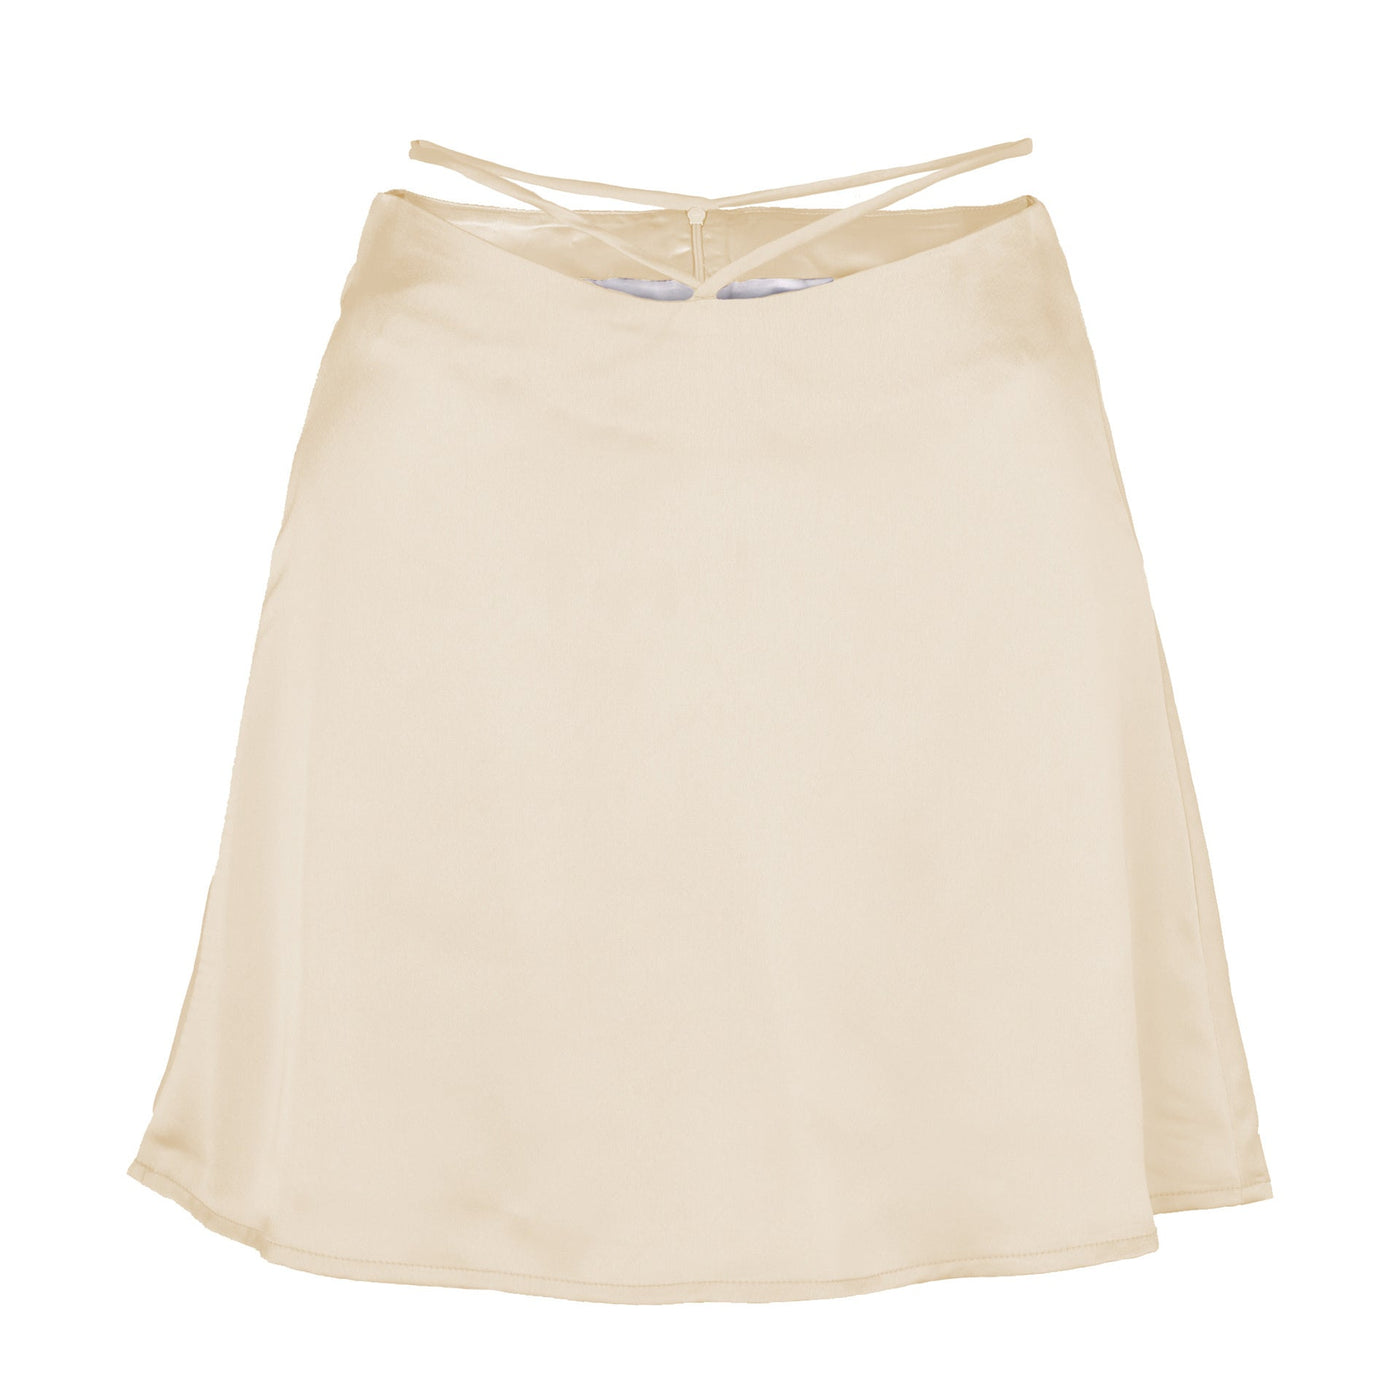 NTG Fad S / Beige New Solid Color Sexy Satin Skirt Fashion Lace Up Zipper High Wait Streetwear Casual Skirts